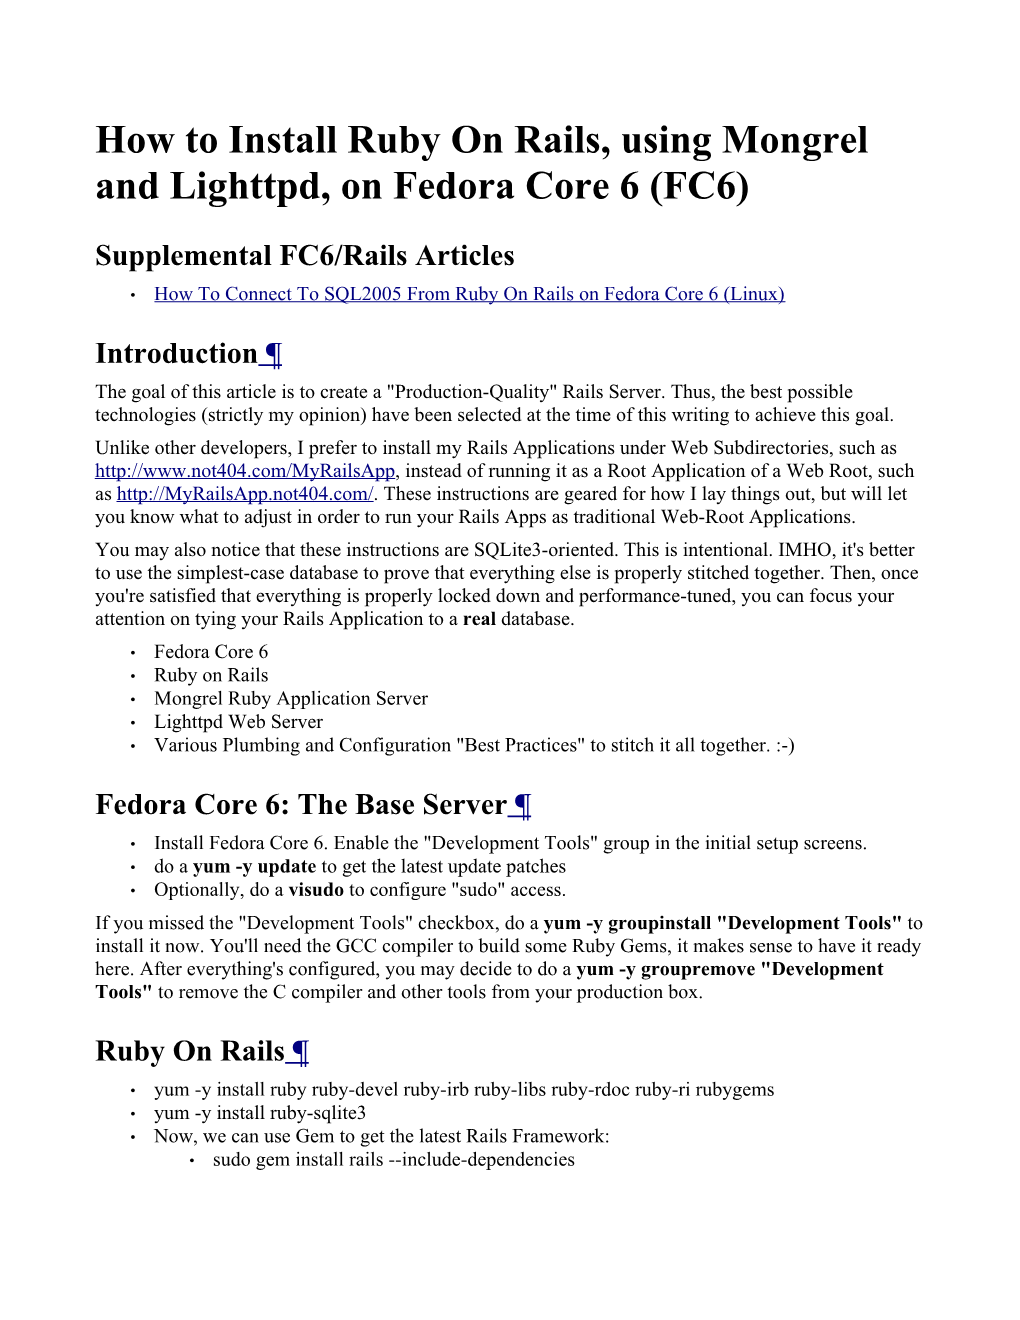 How to Install Ruby on Rails, Using Mongrel and Lighttpd, on Fedora Core 6 (FC6)